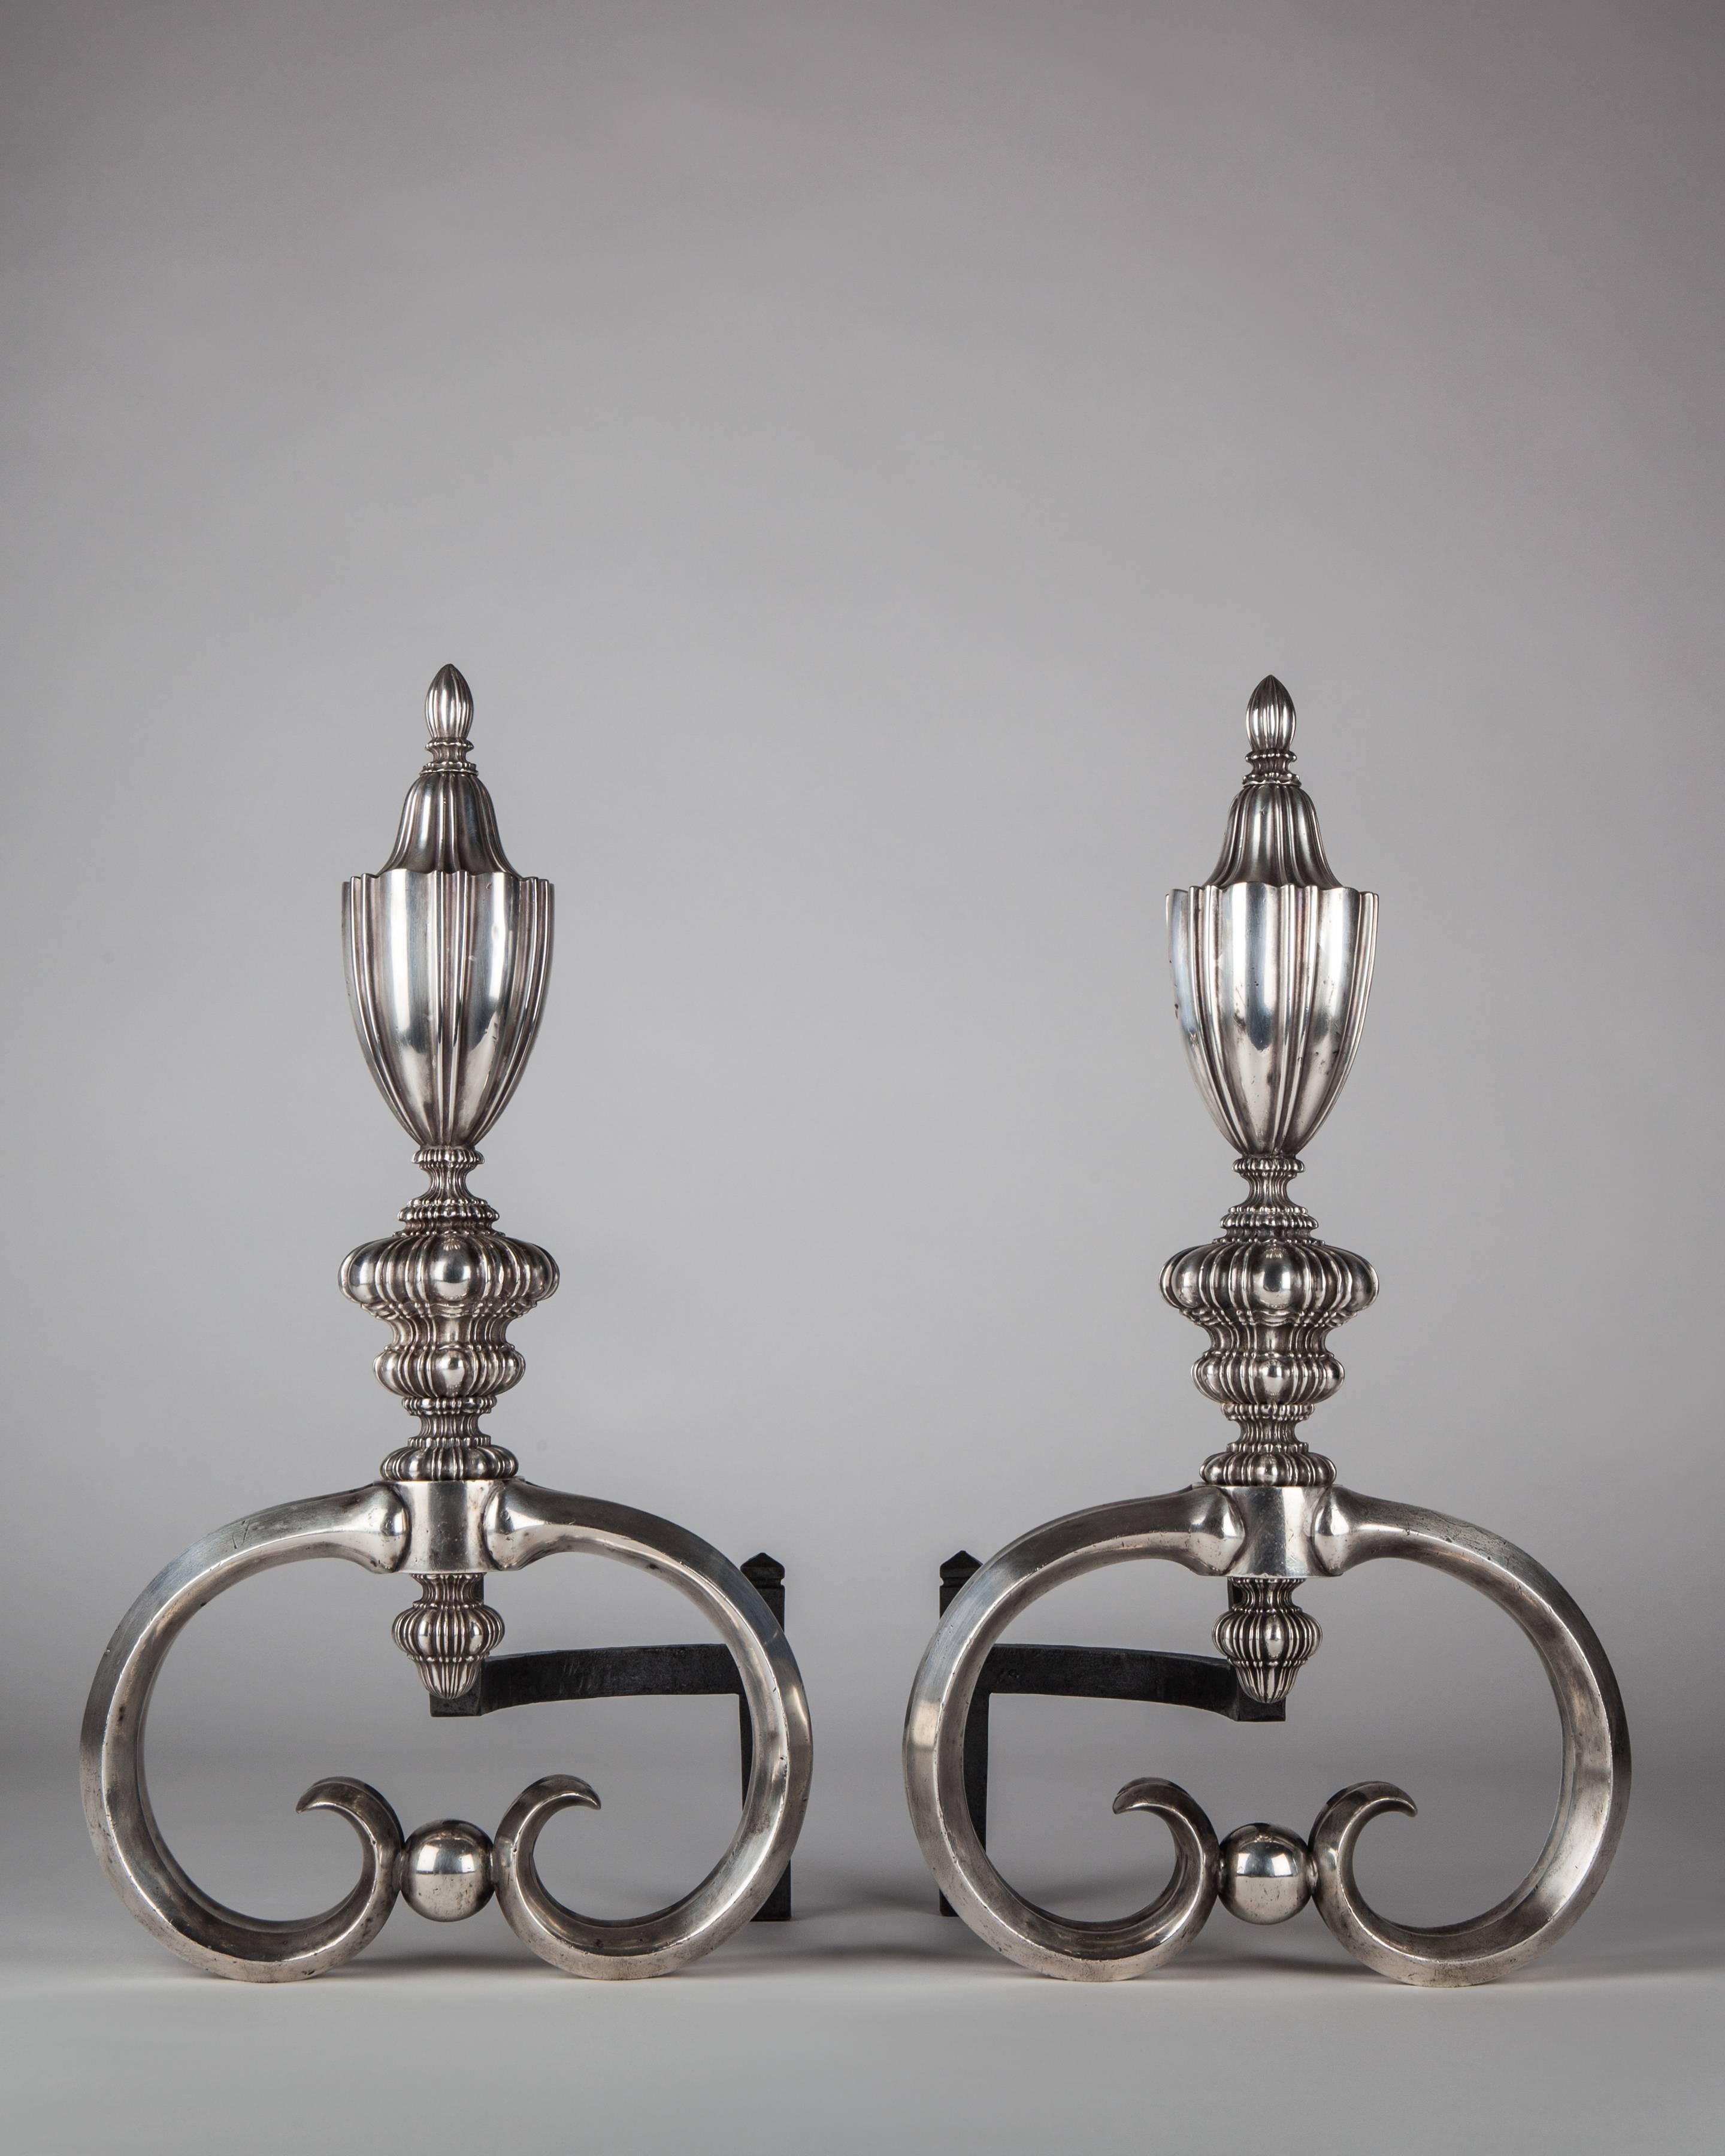 AFP0582
A pair of antique silver plate over bronze andirons or chenets with delicate linenfold urn-from bodies on bold, fluted, double C-scroll legs. Attributed to the New York maker E. F. Caldwell.
Dimensions:
Overall 20